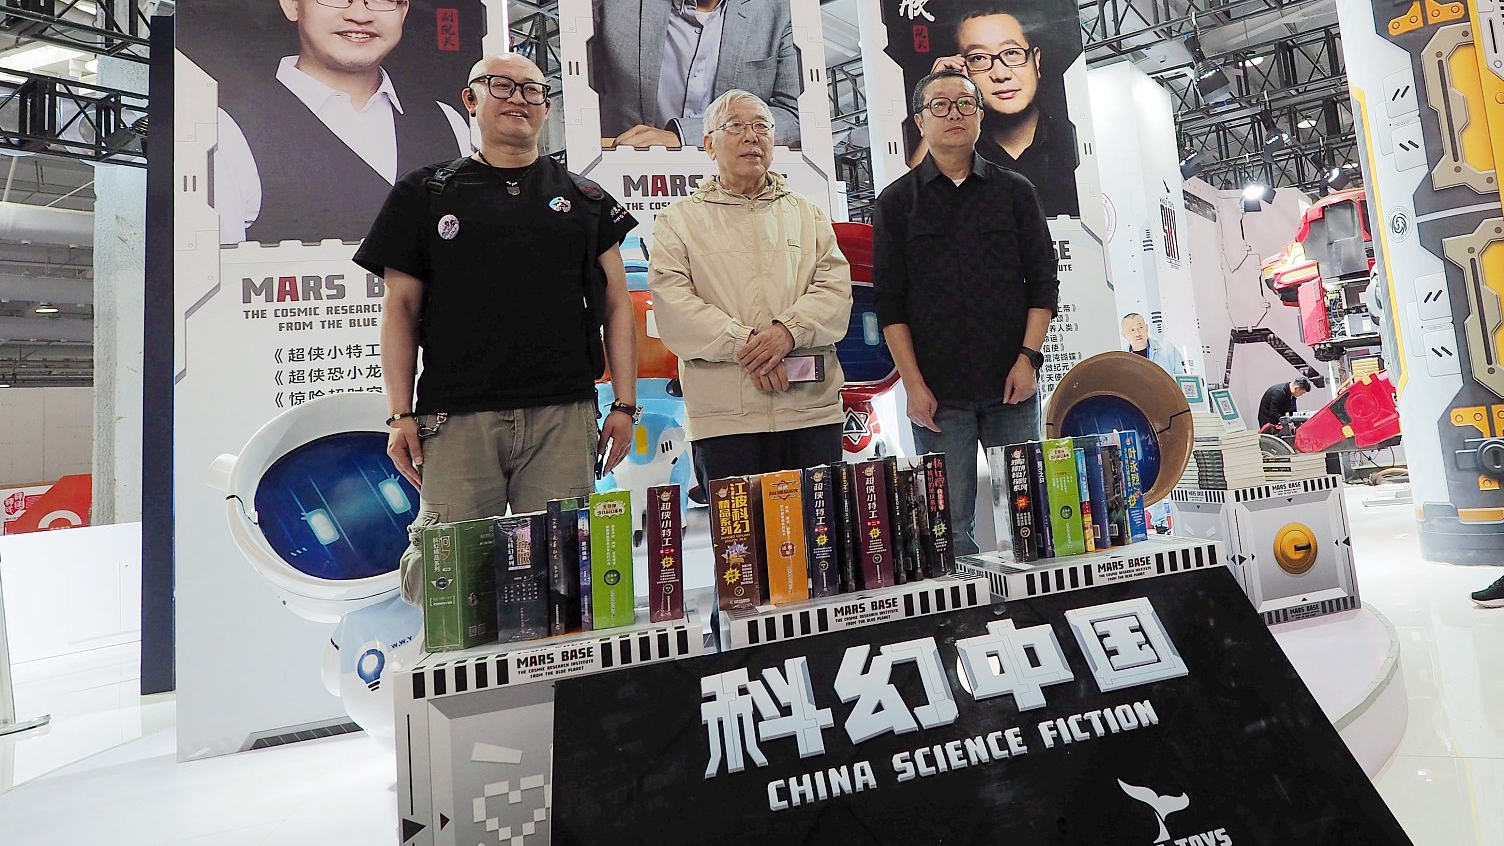 Global interest in Chinese sci-fi growing: reports